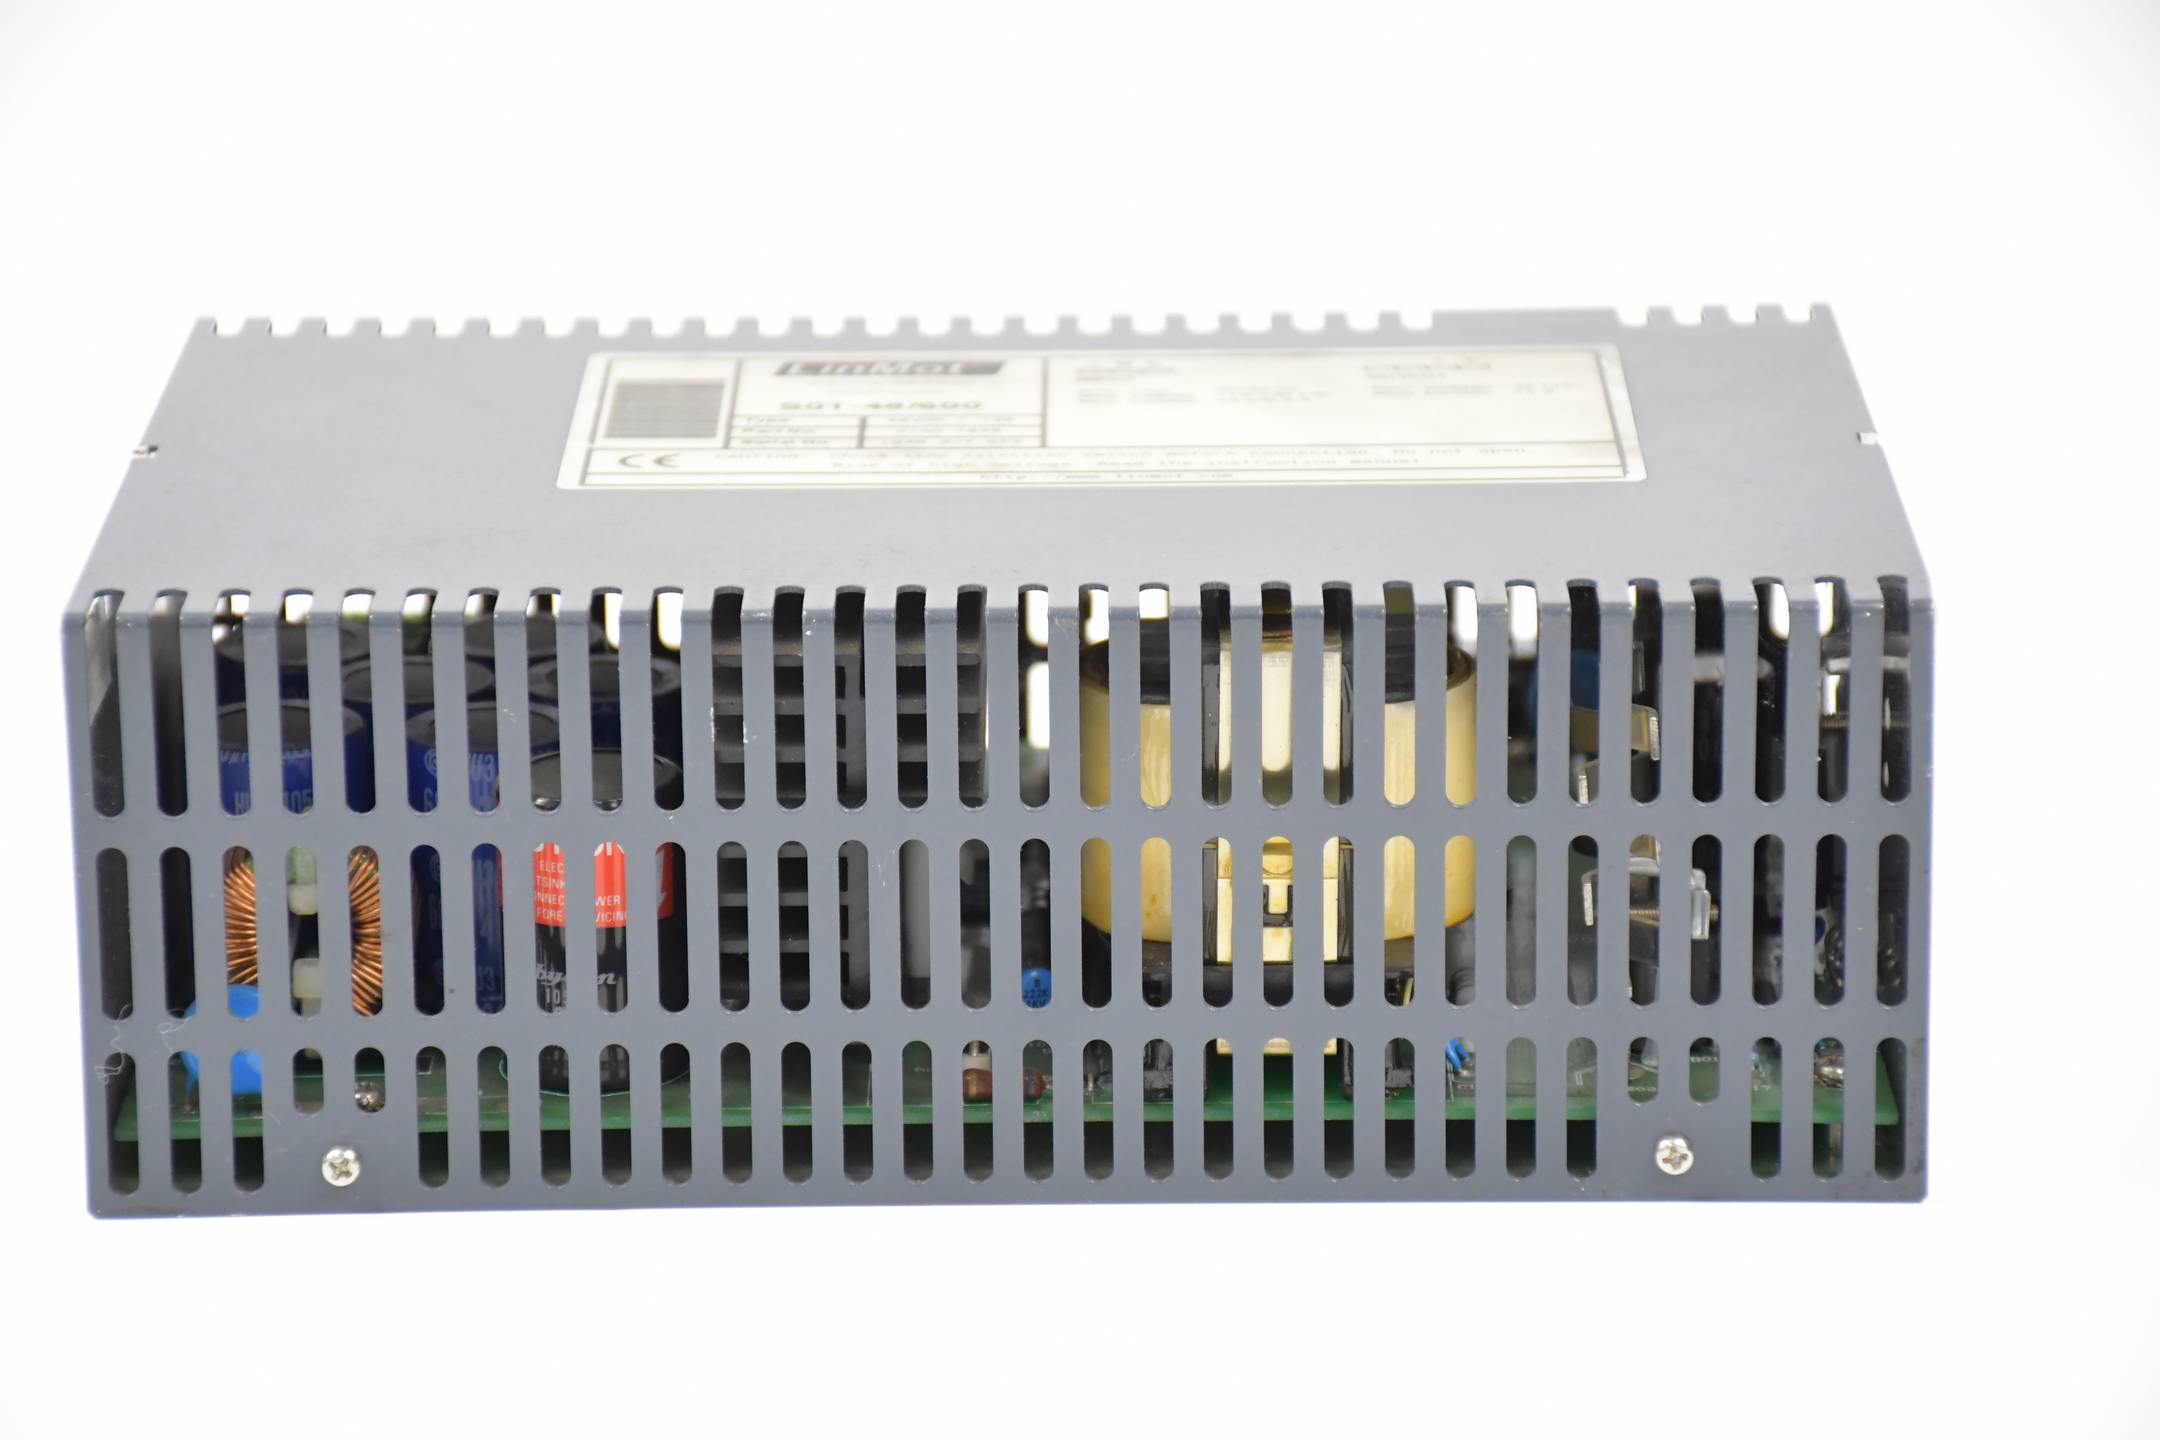 LinMot industrial switching power supply S01-48/600 48VDC / 12A